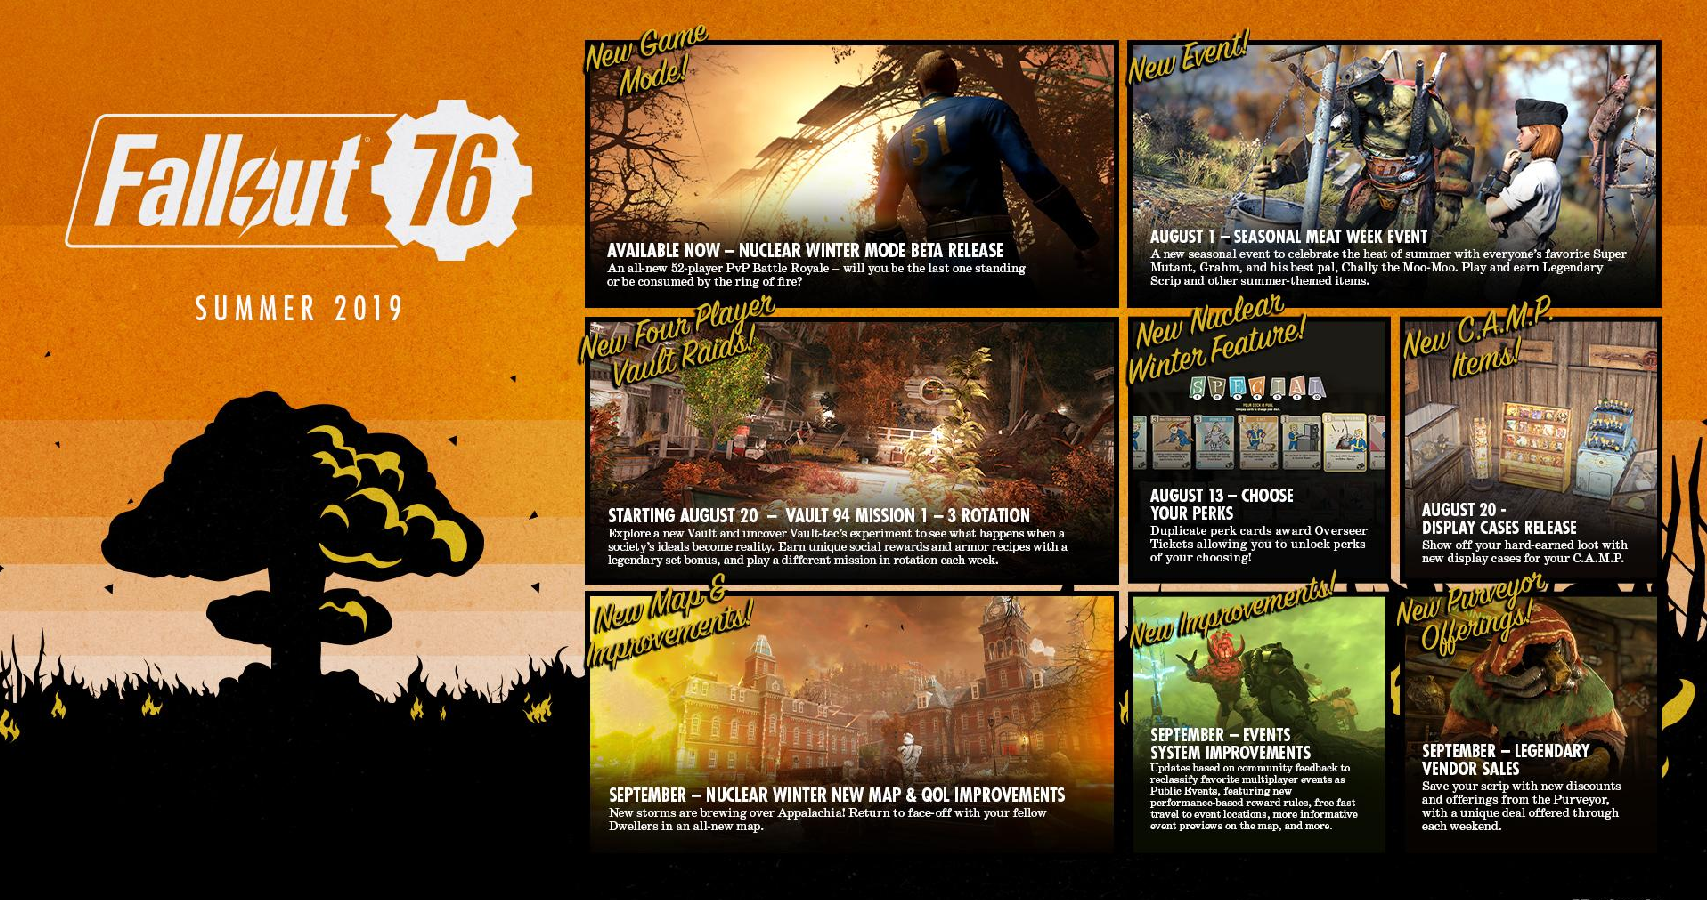 Fallout 76's Summer Roadmap Highlights Quality Of Life System Improvements